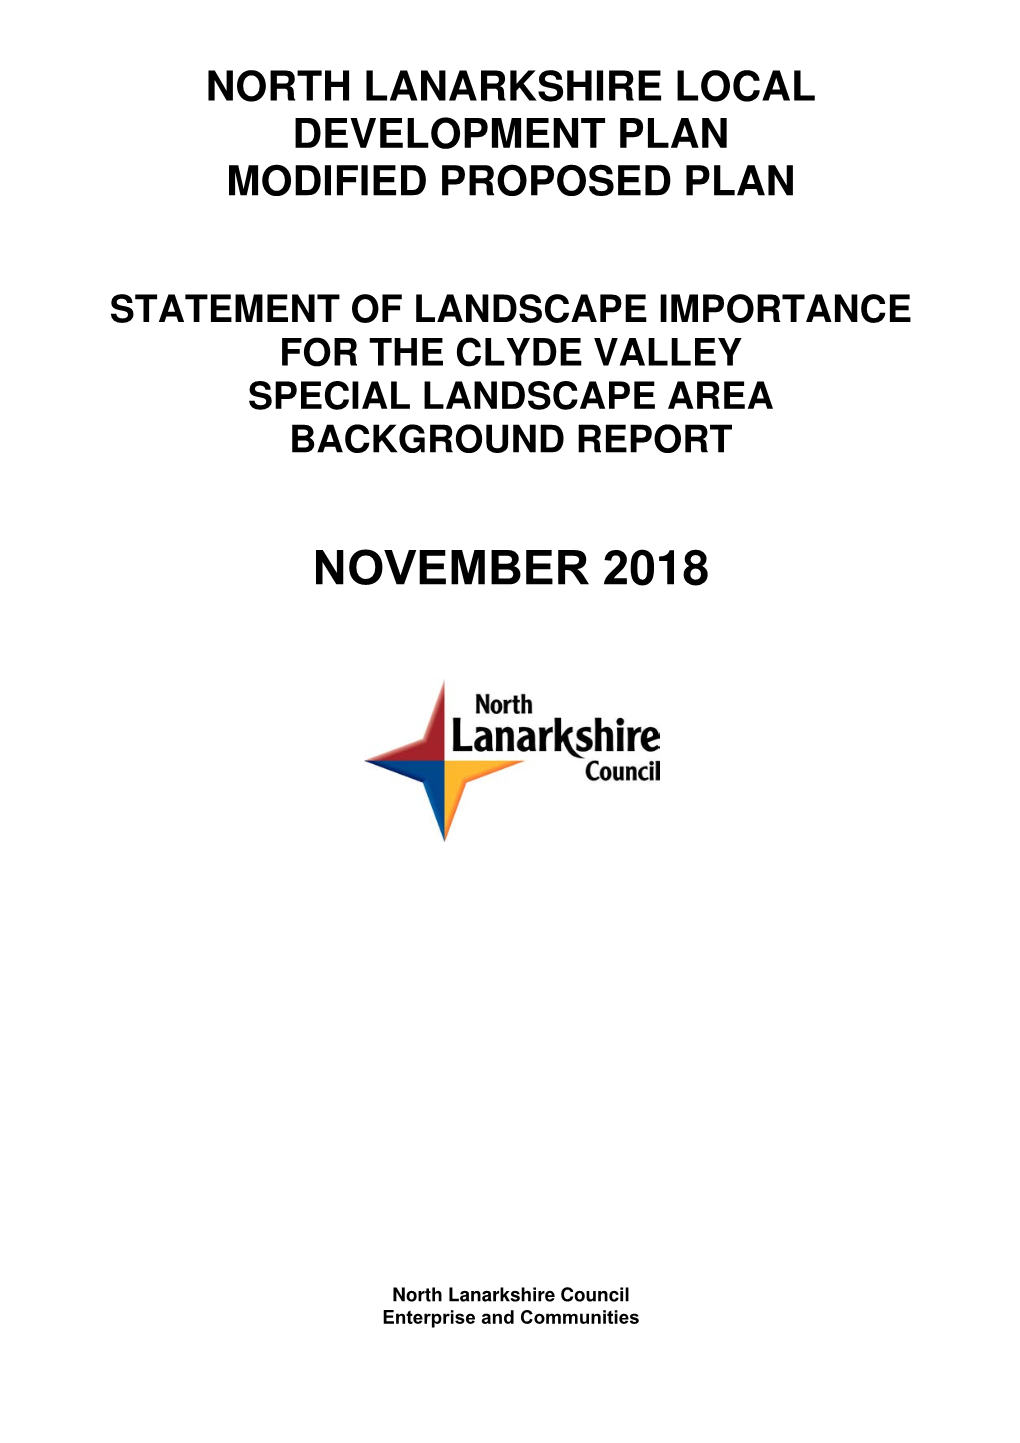 Statement of Landscape Importance Clyde Valley